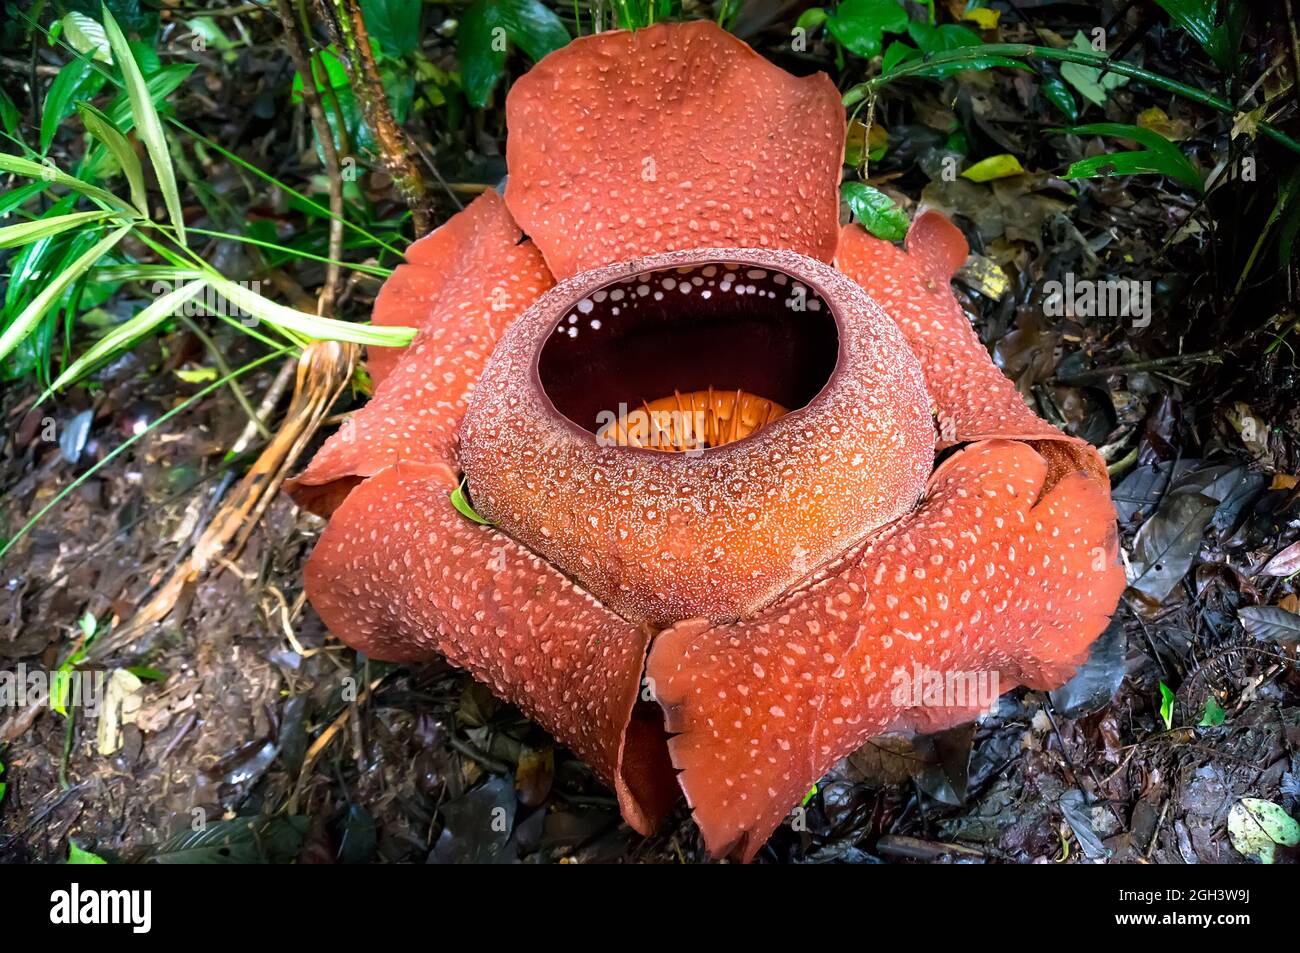 rafflesia - the world's largest flower. rare beautiful red flower in the jungle. Stock Photo